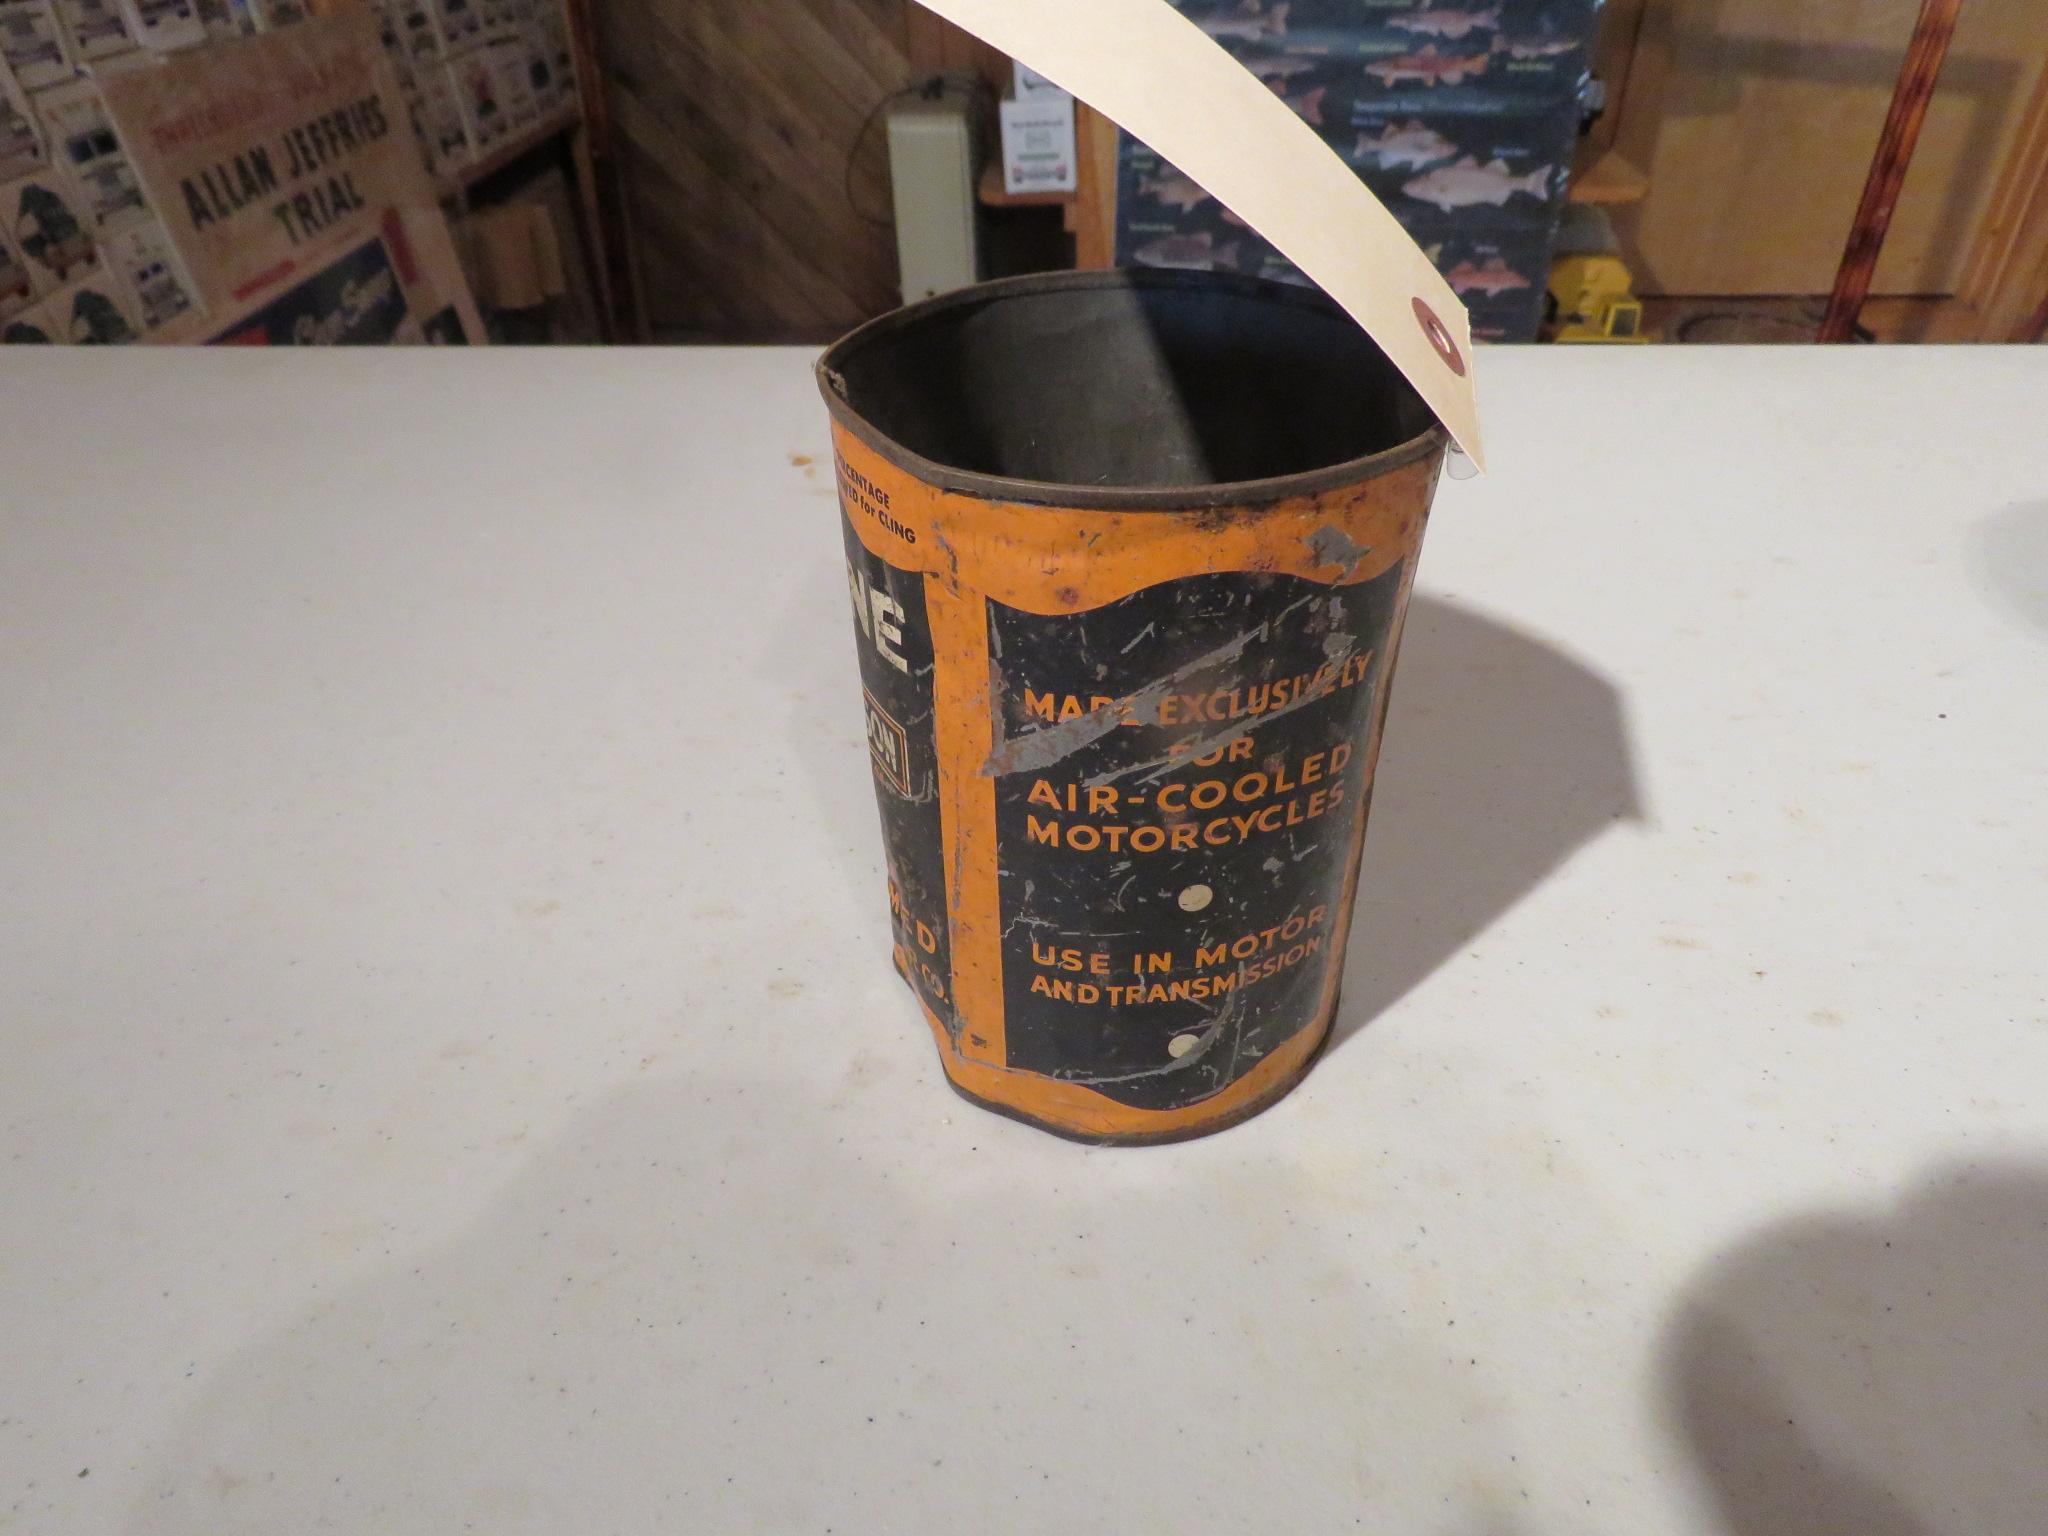 Harley Davidson Oil Can Empty and Top Cut